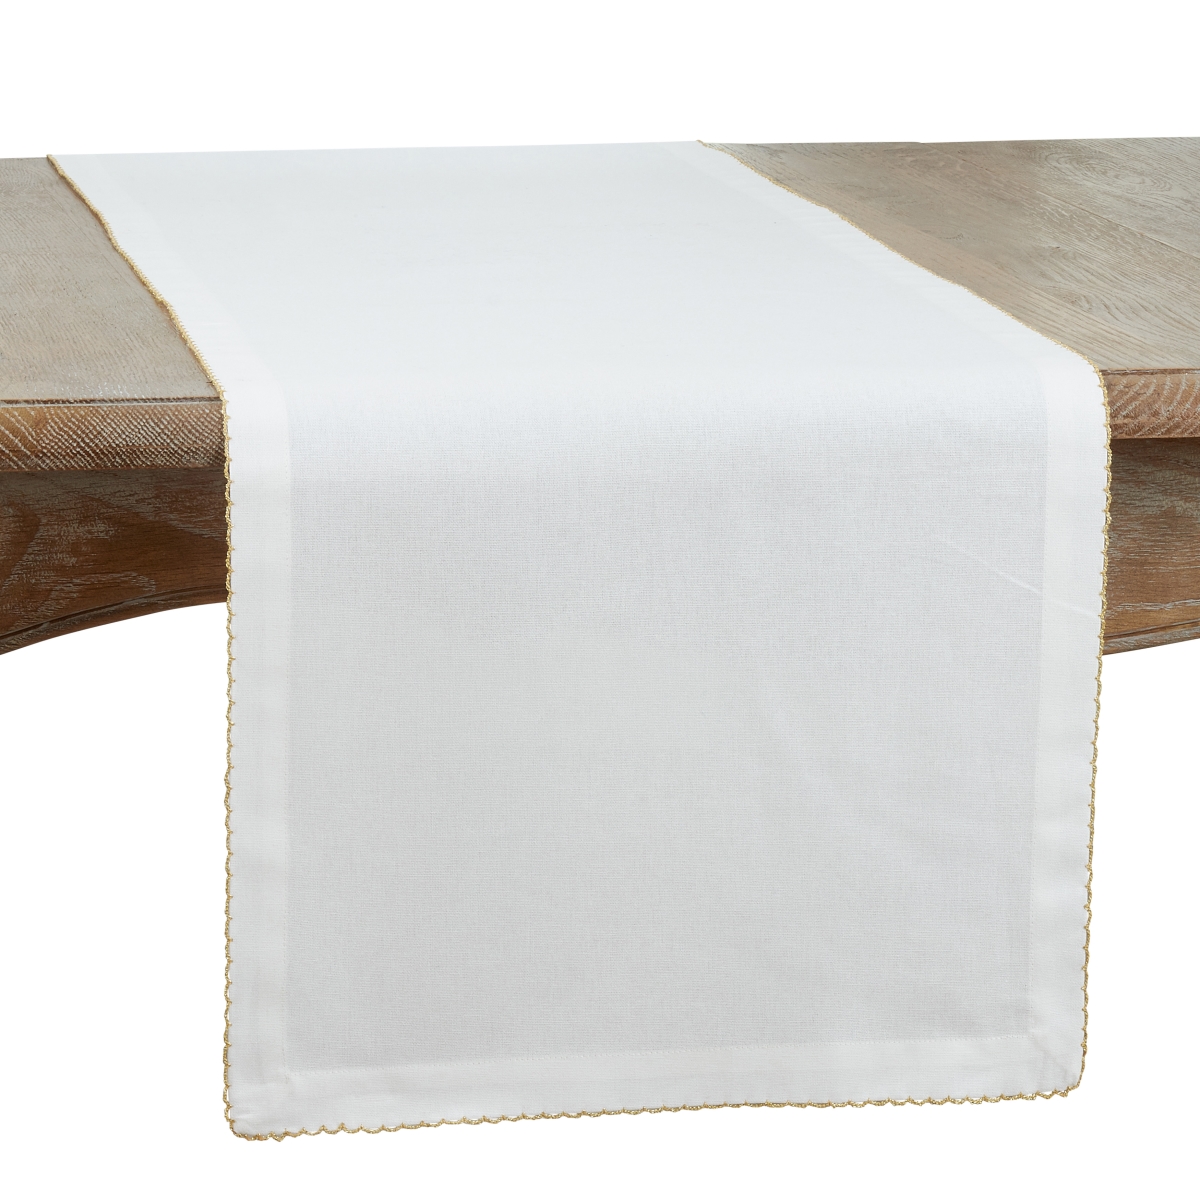 Picture of Saro Lifestyle 1442.GL16120B 16 x 120 in. Whip Stitched Oblong Table Runner, Gold